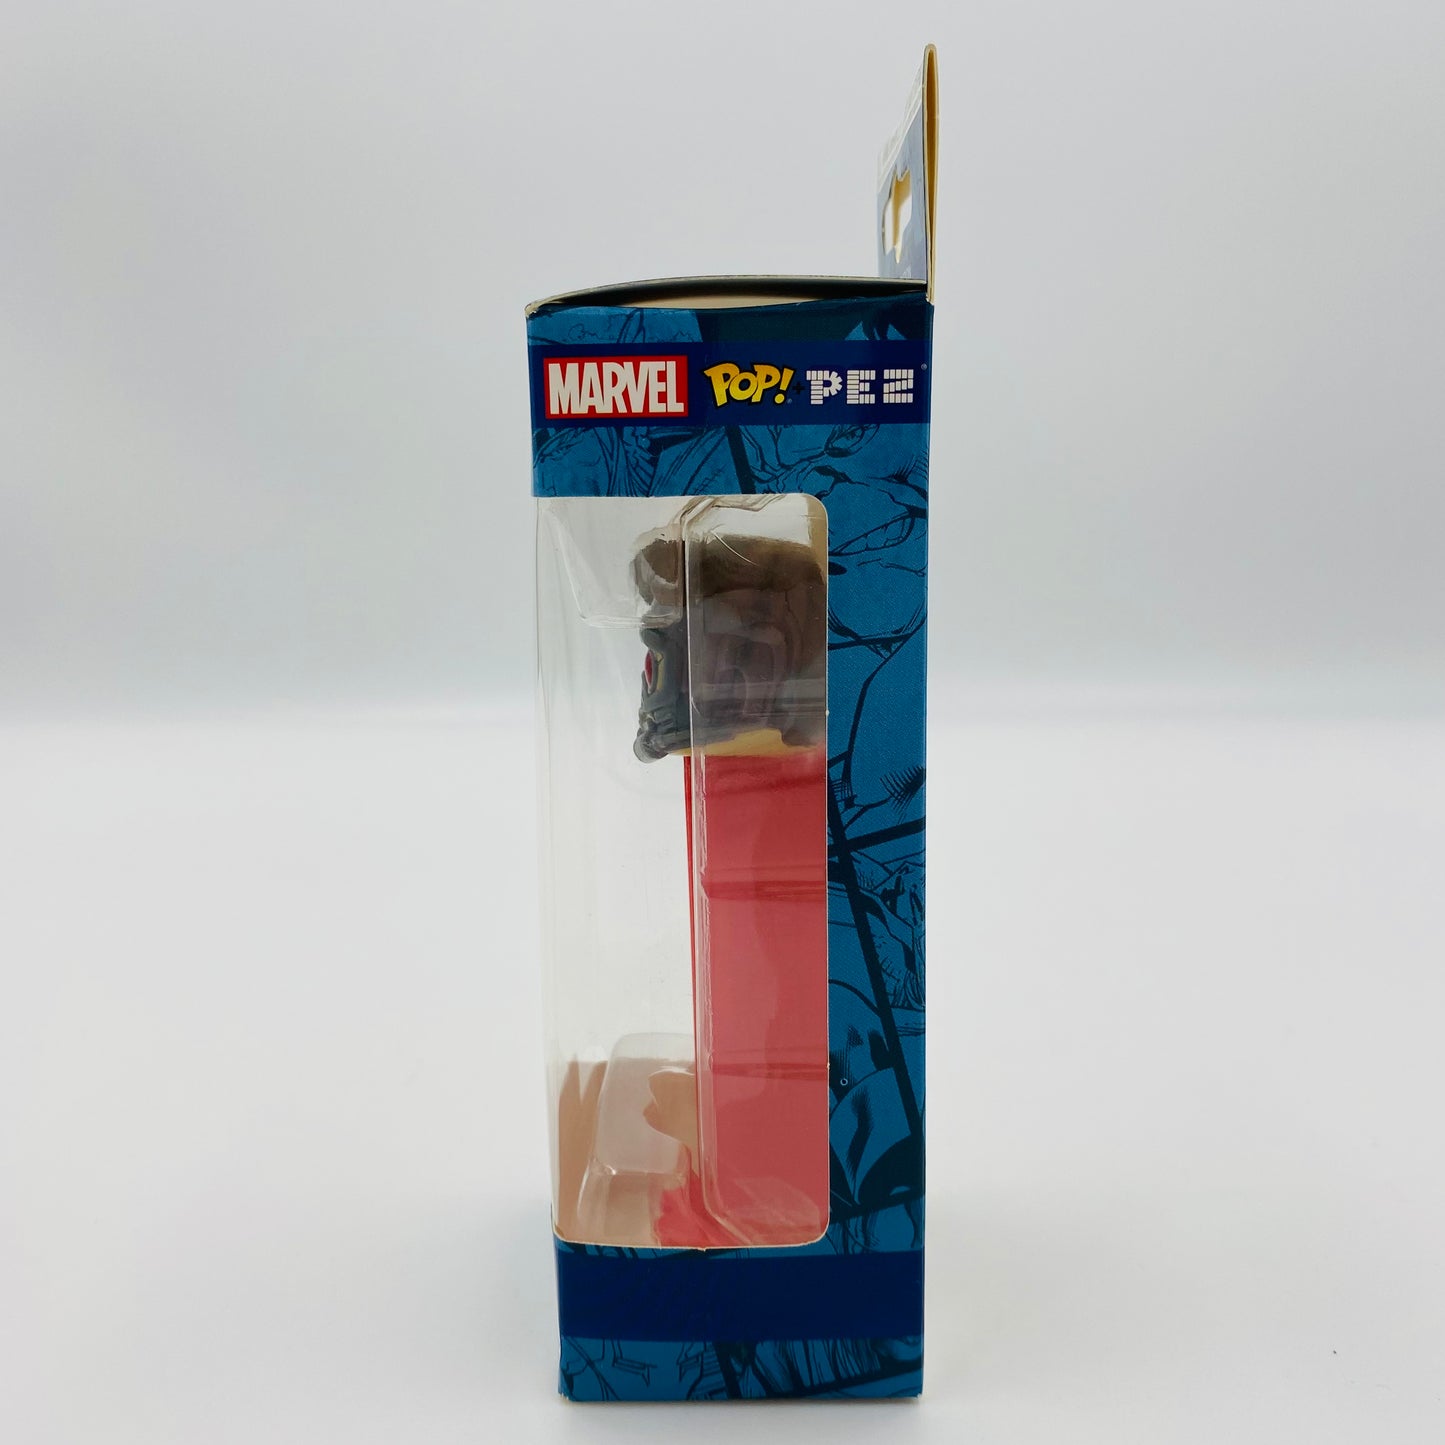 Marvel Guardians of the Galaxy Star-Lord Pop! + PEZ dispenser (2018) boxed